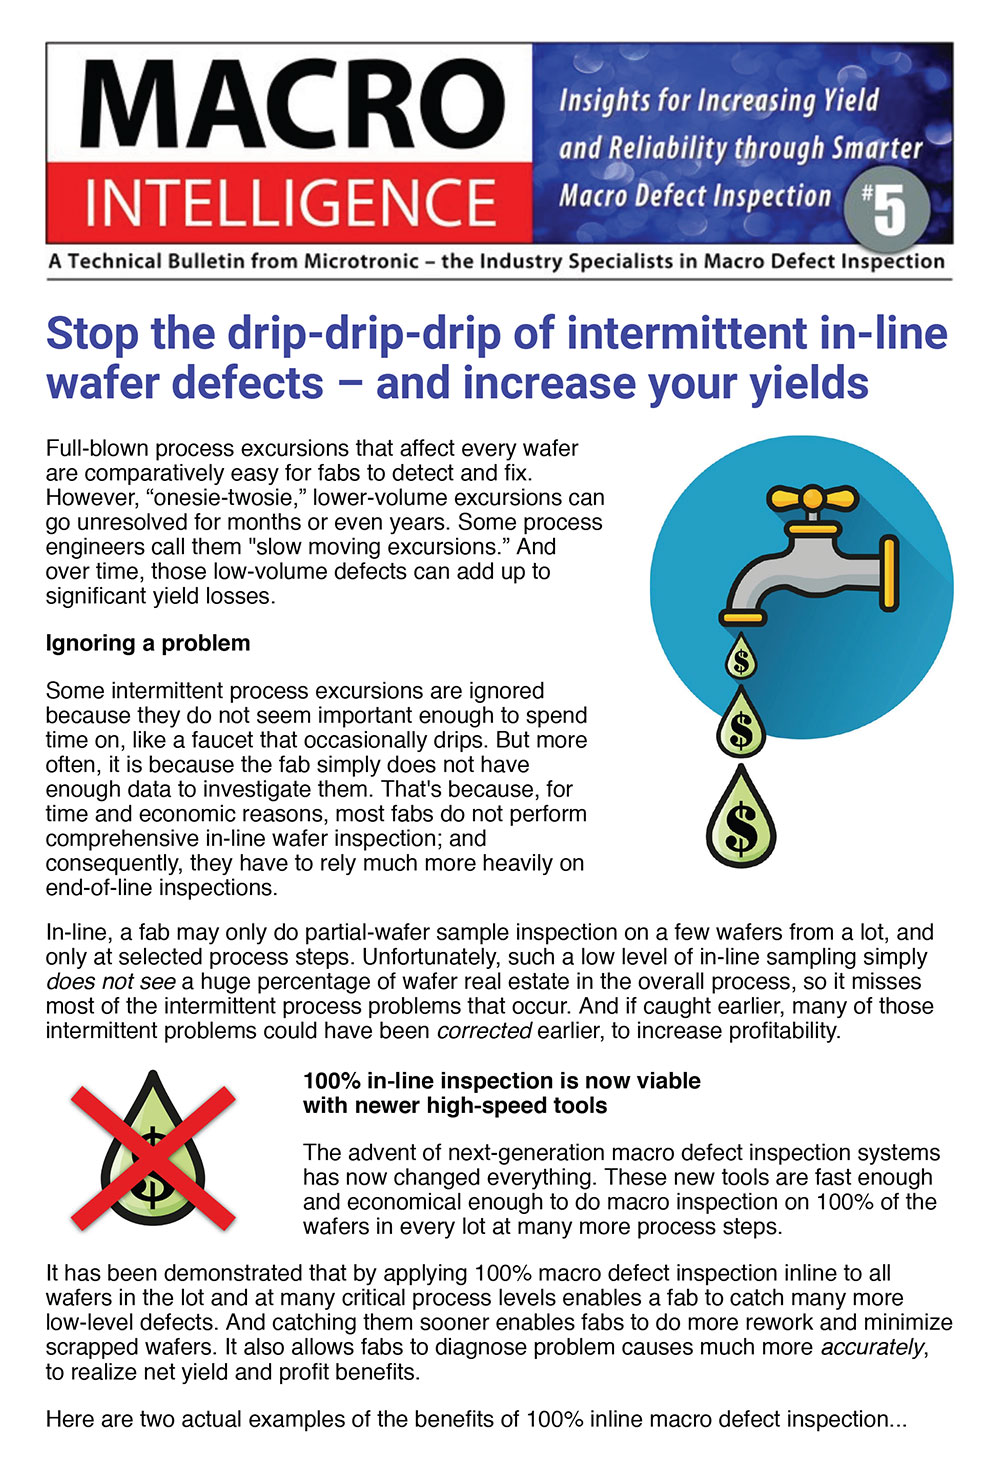 Stop the drip-drip-drip of intermittent in-line wafer defects - and increase your yields